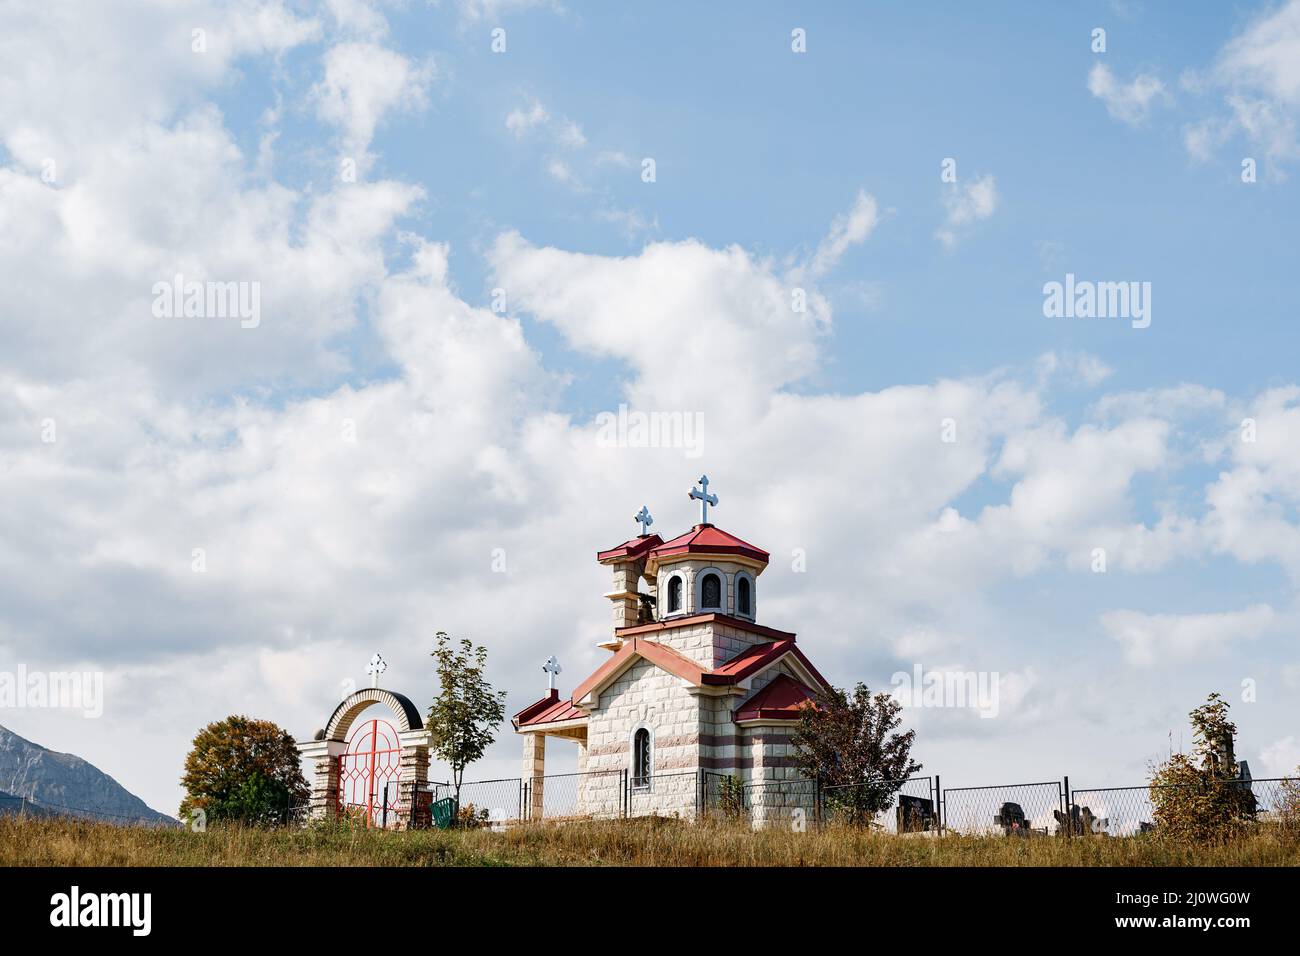 White brick church with a red roof in a field with a metal fence Stock Photo